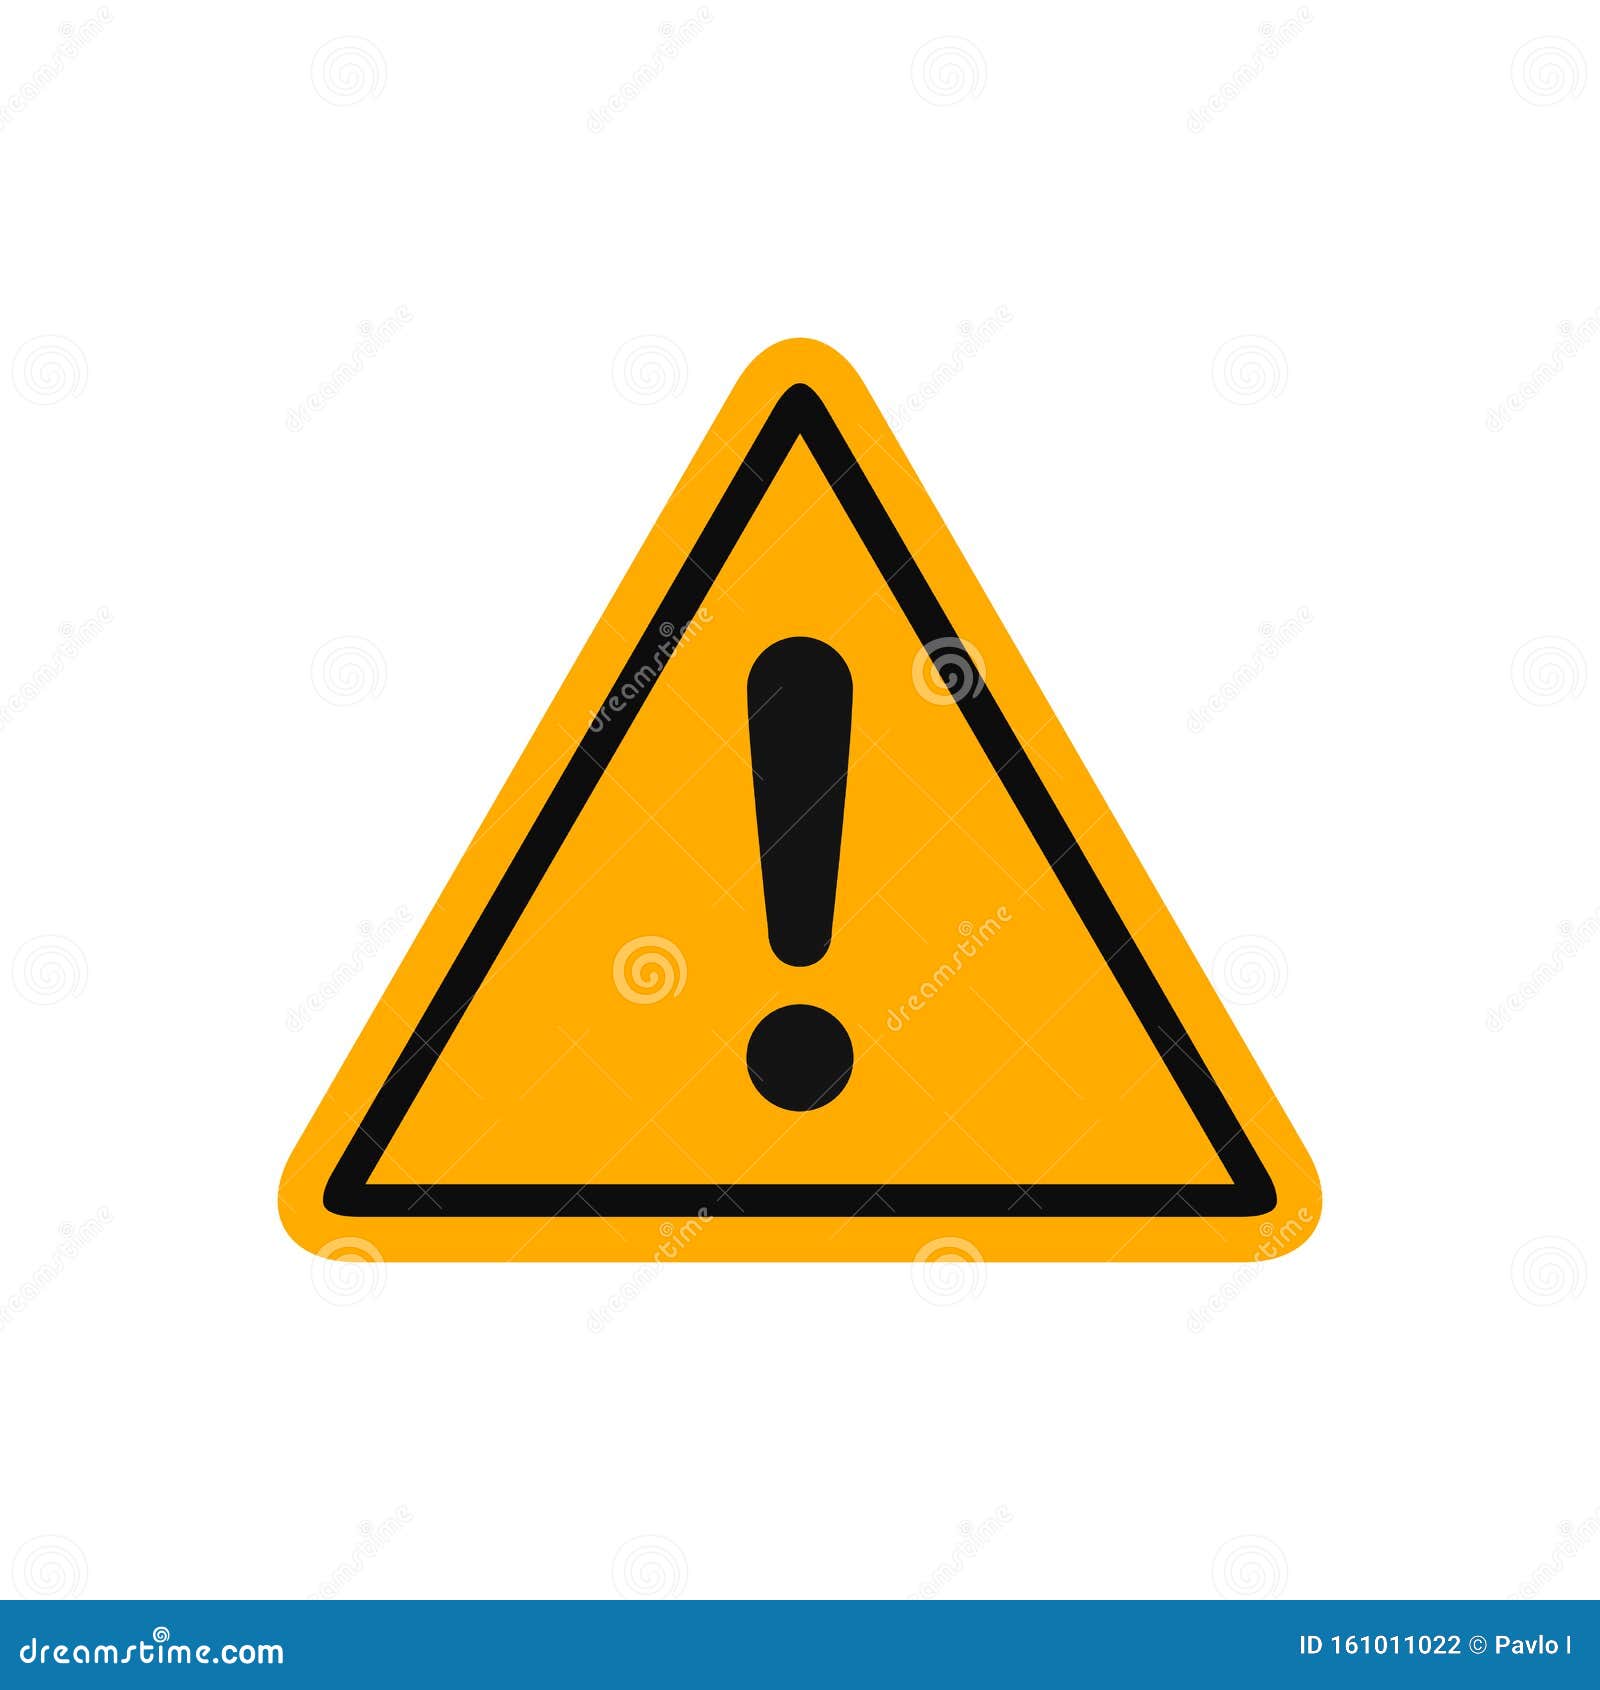 warning, precaution, attention, alert icon, exclamation mark in triangle  Ã¢â¬â 